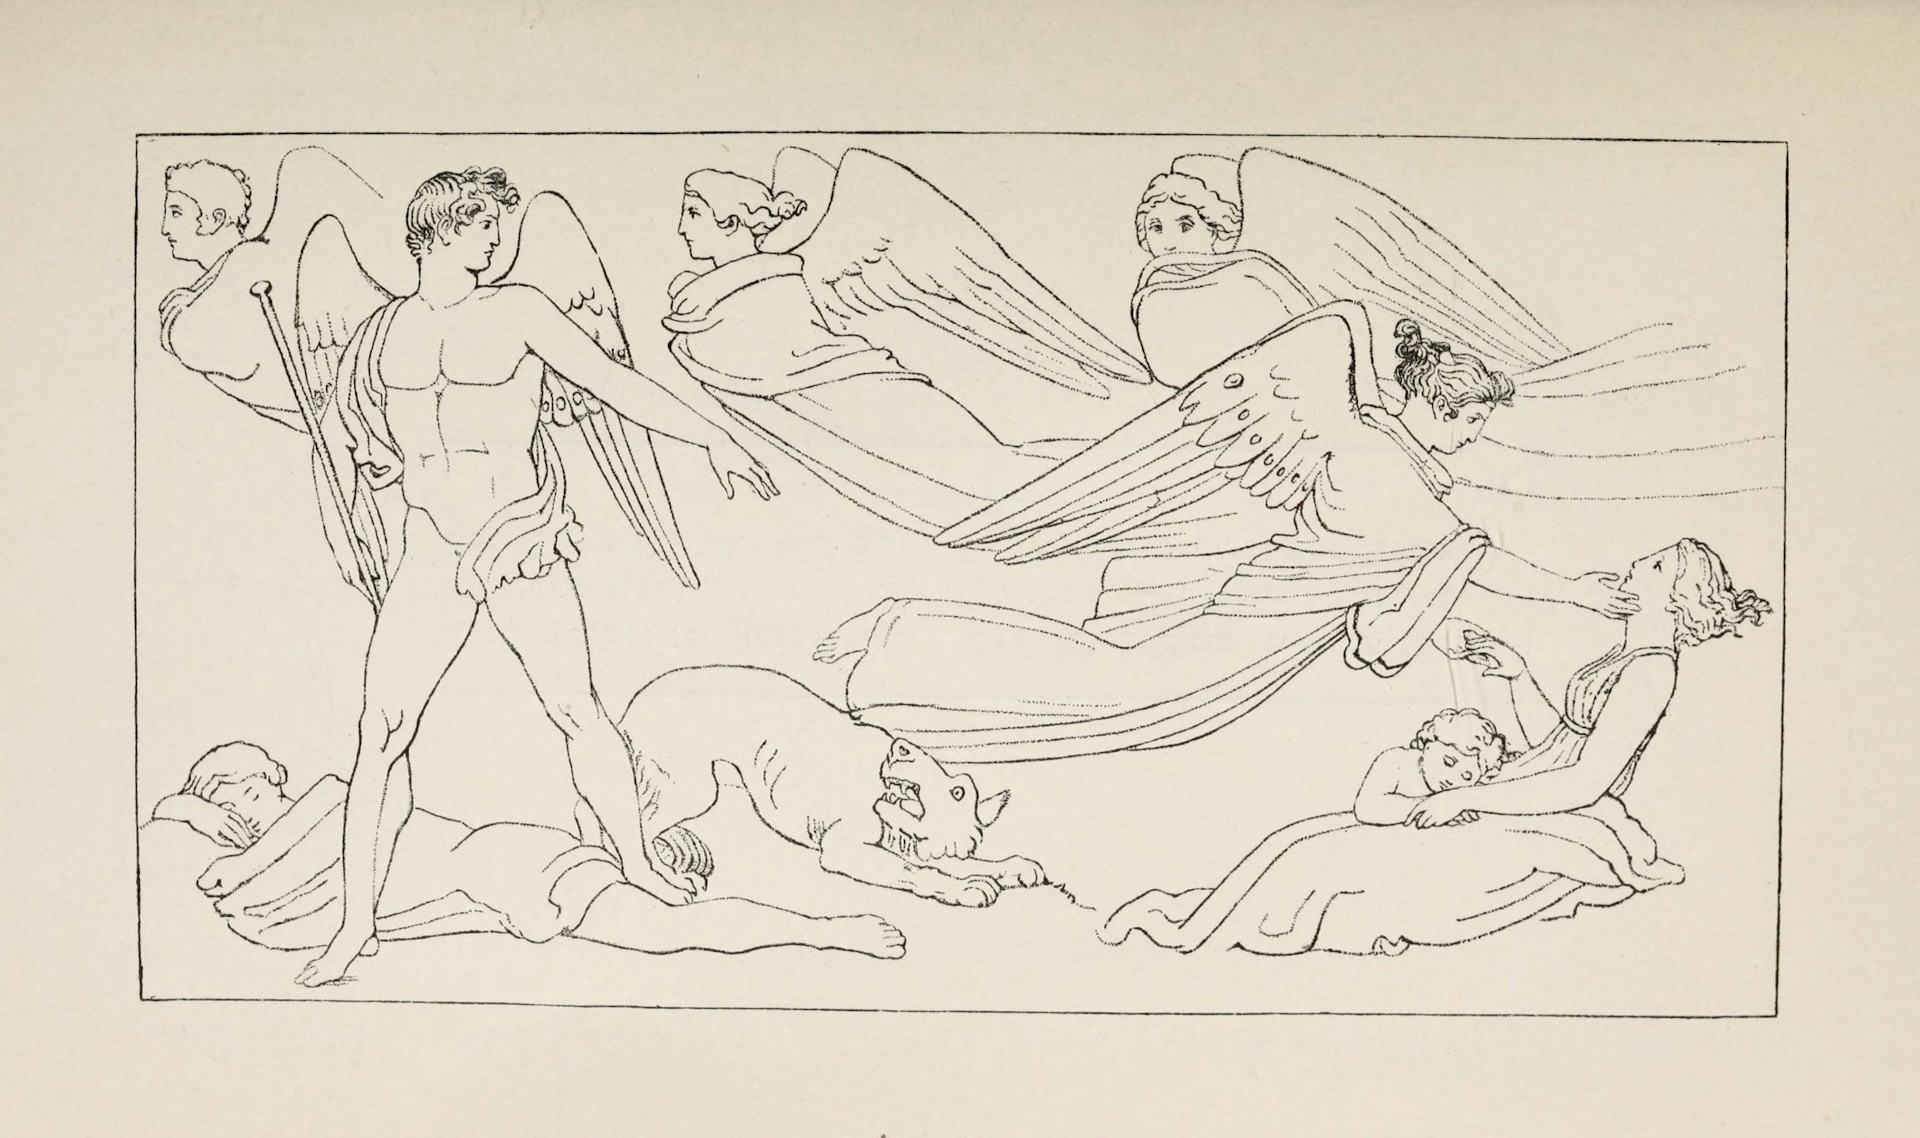 Illustration showing the souls of Hesiod’s Golden Race as daemons.